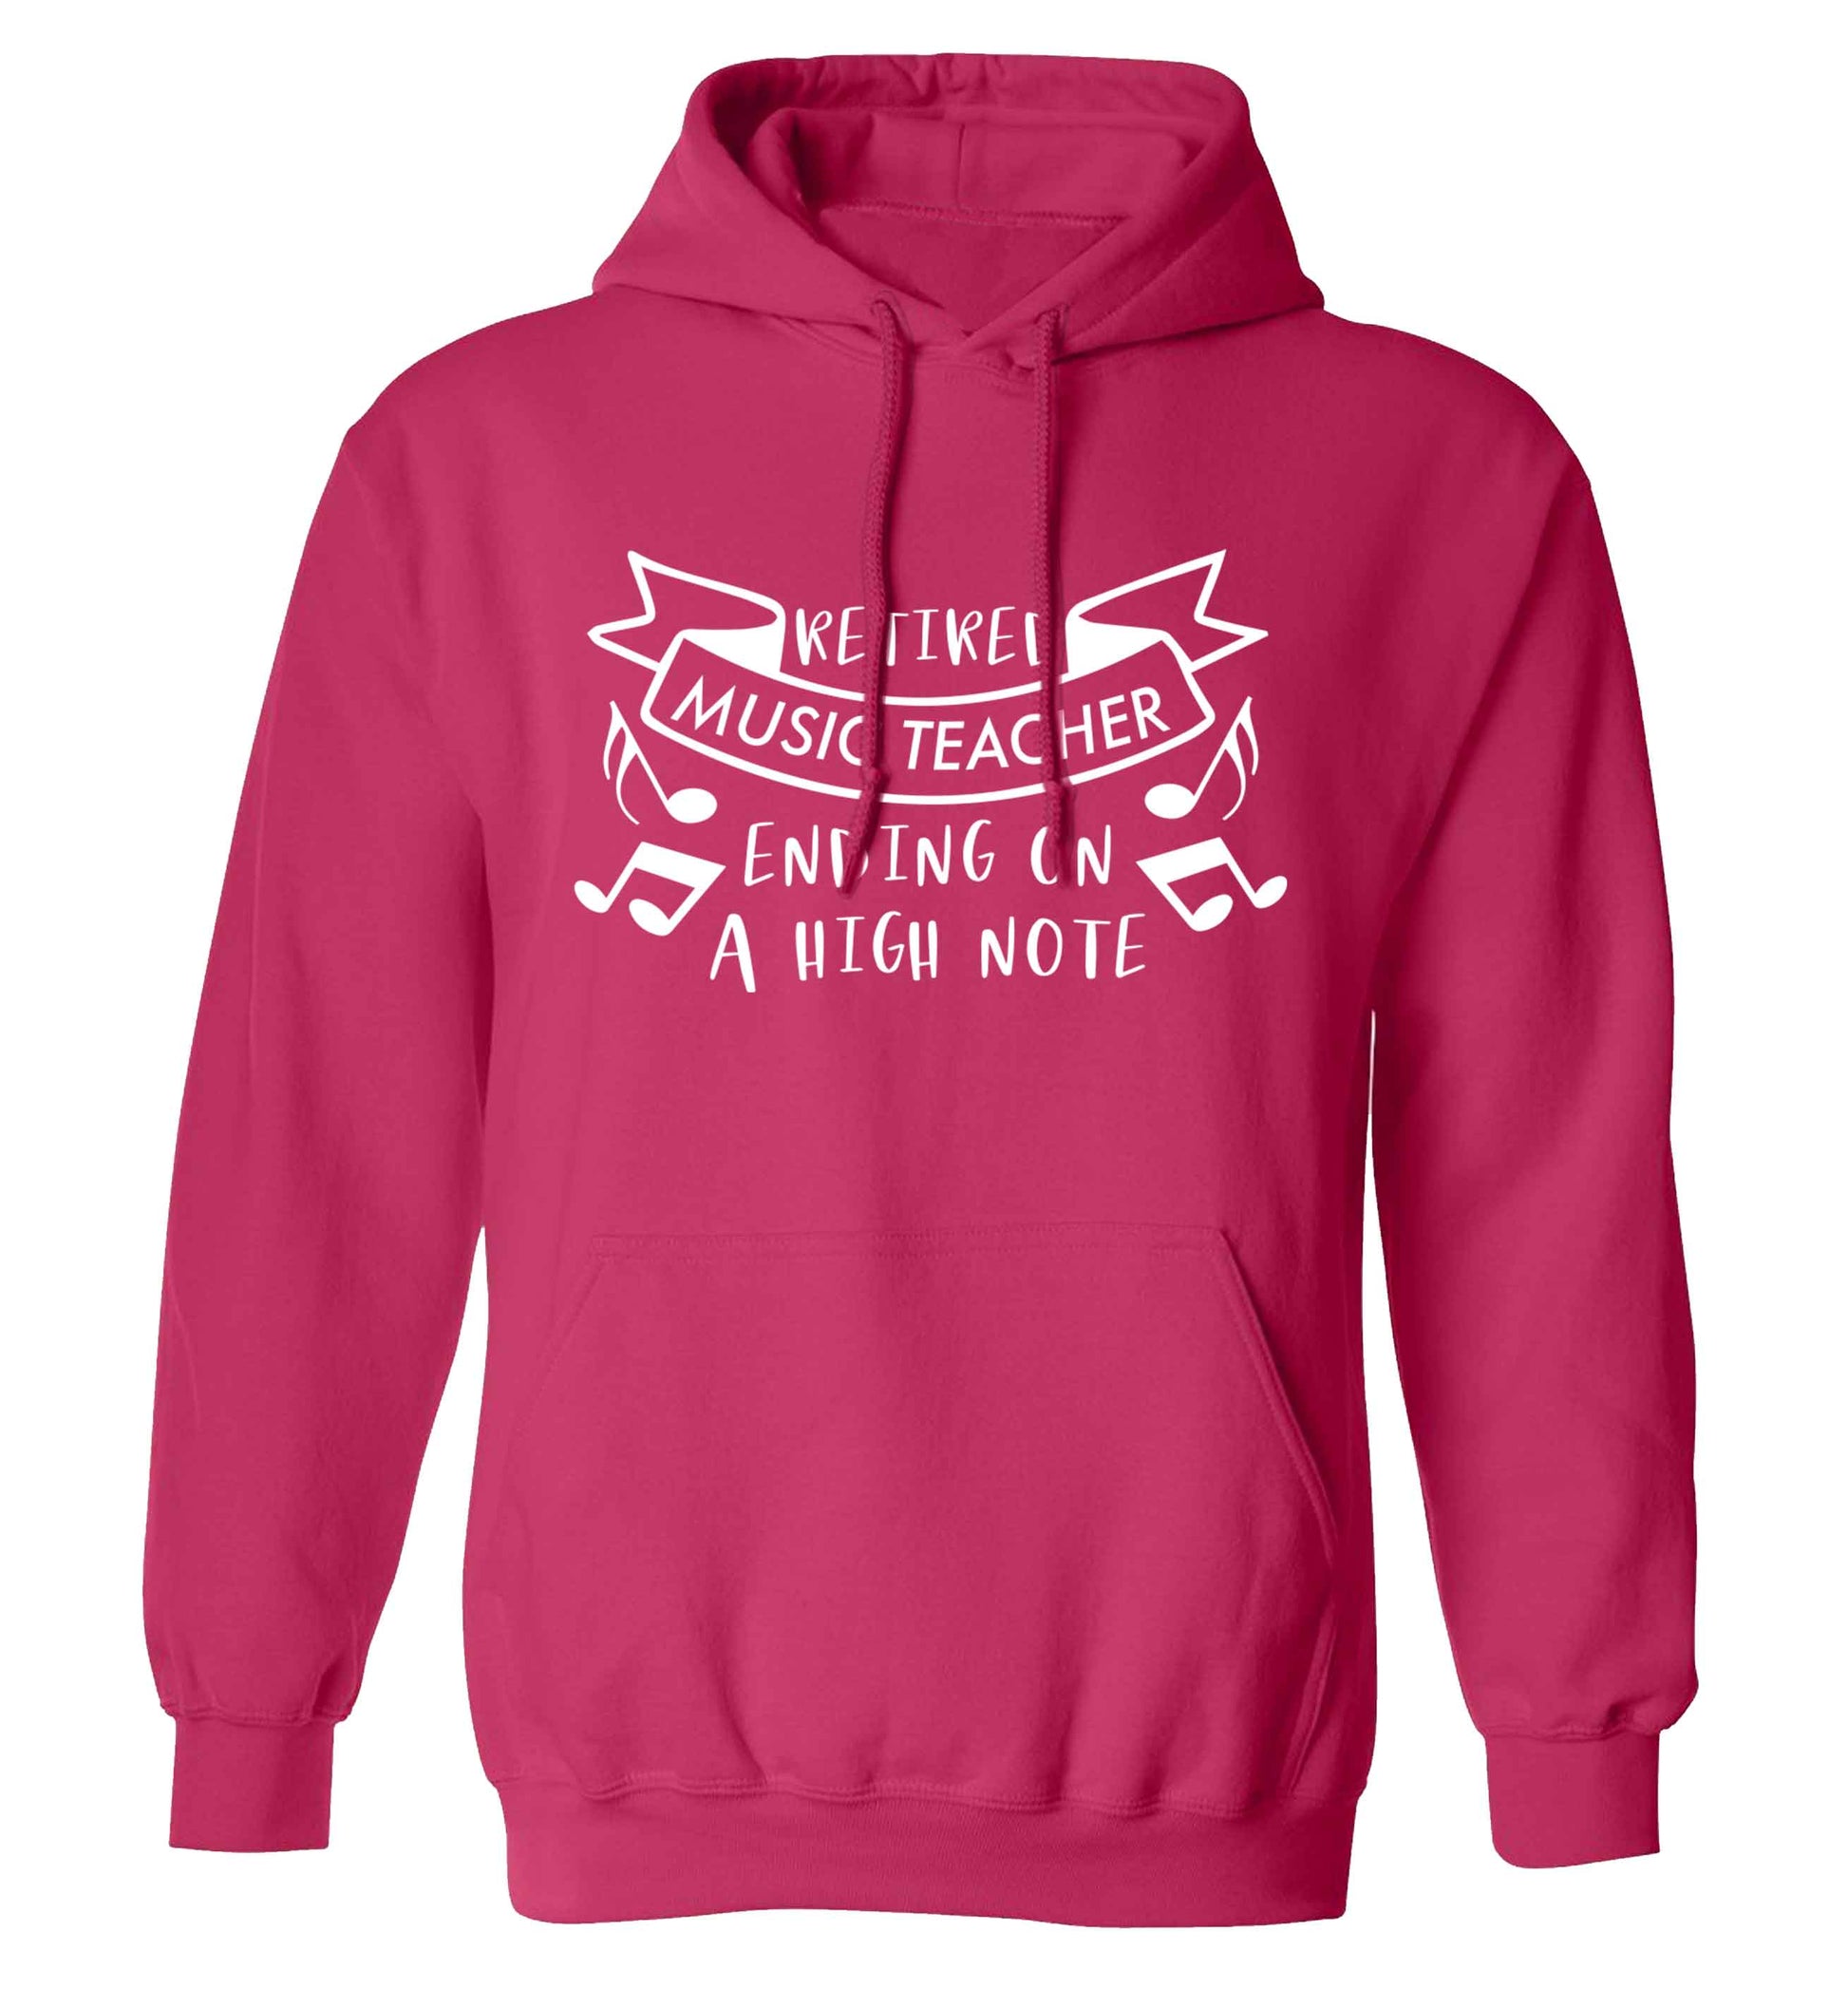 Retired music teacher ending on a high note adults unisex pink hoodie 2XL